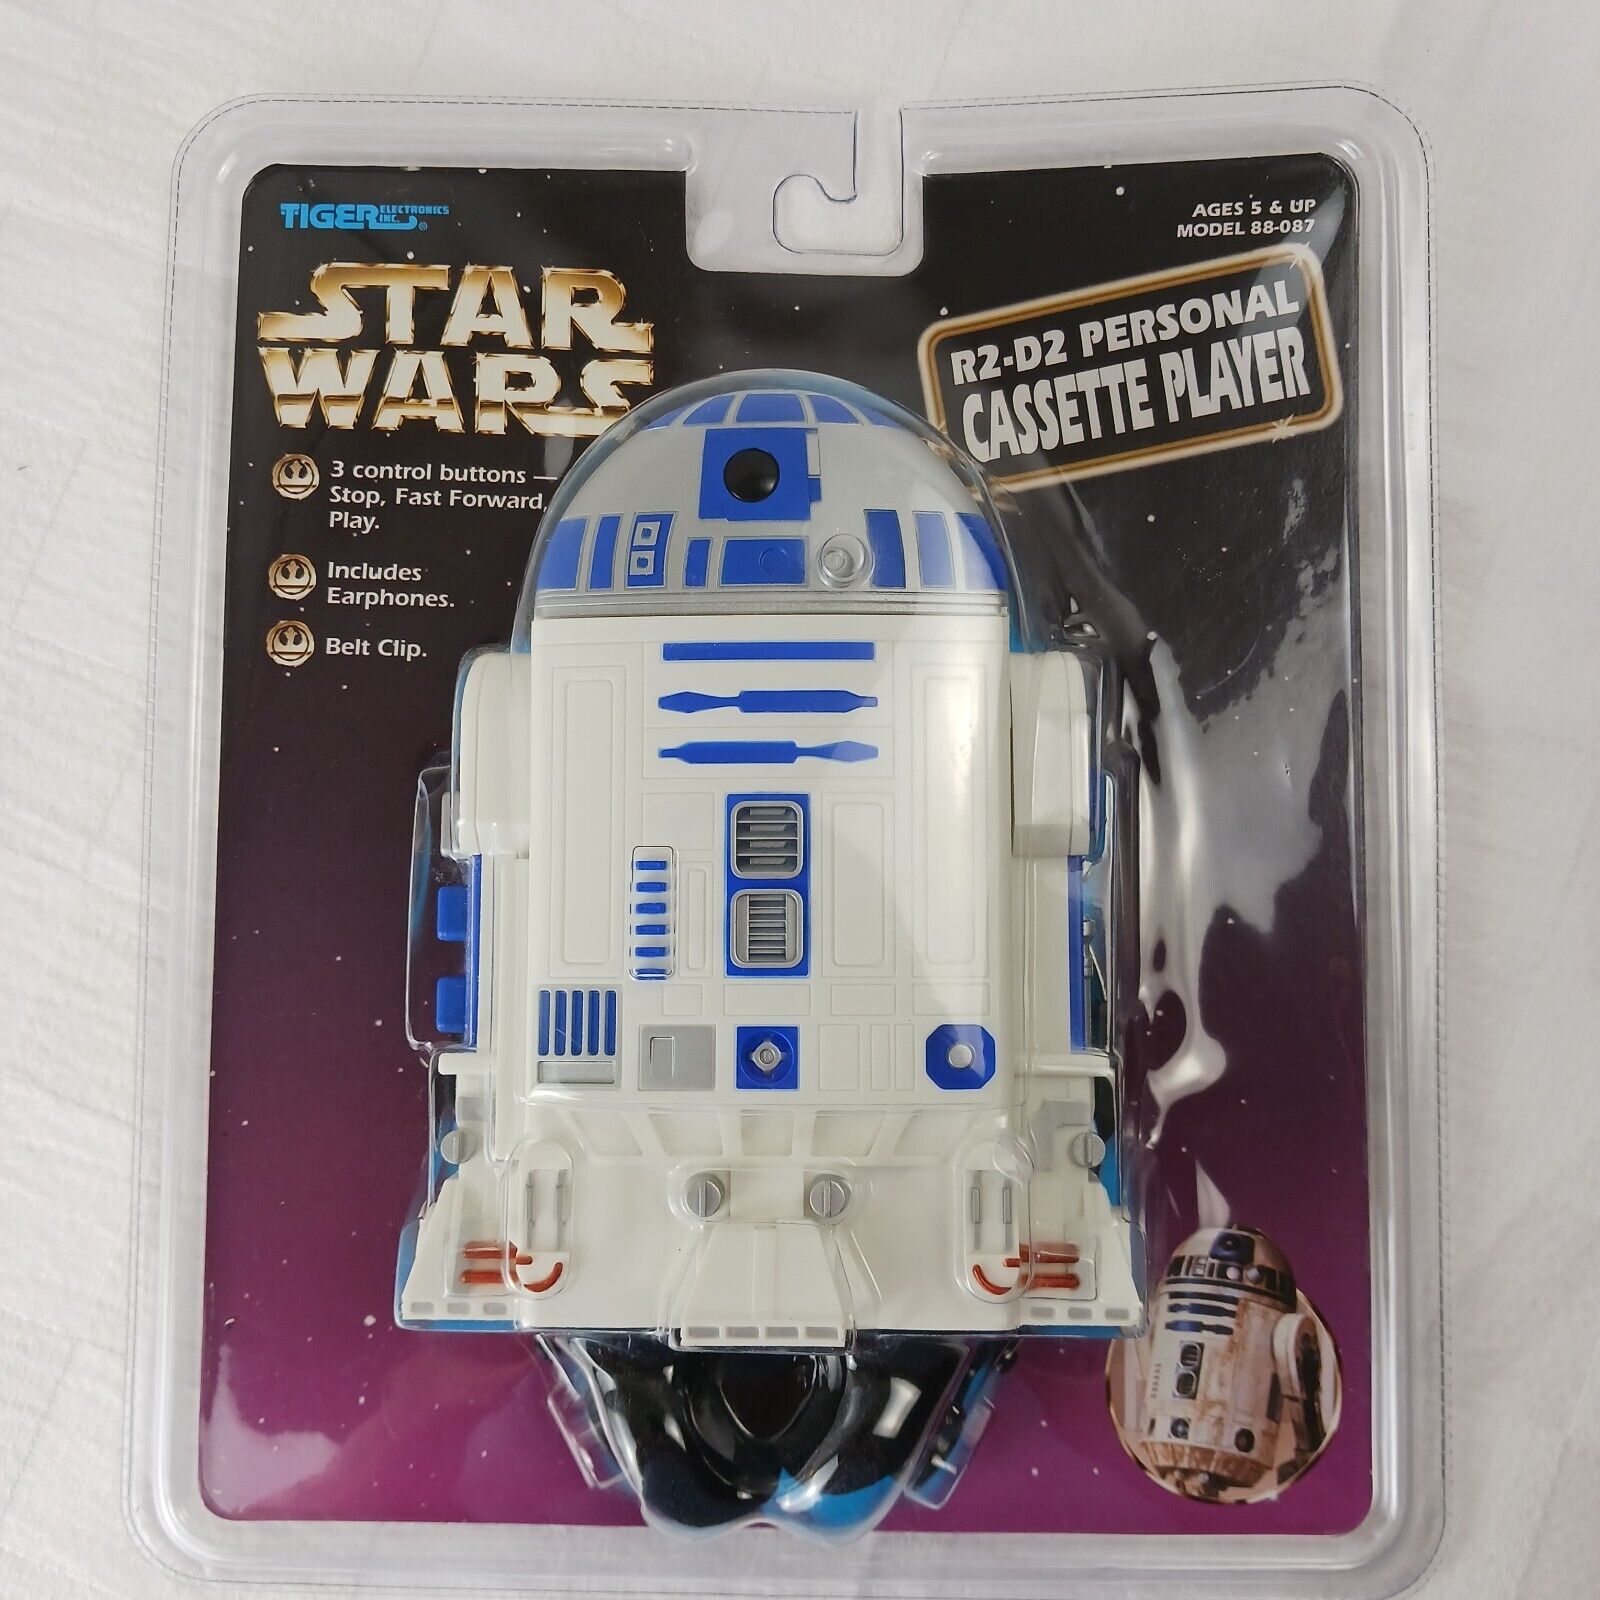 Vintage 1997 Star Wars R2-D2 Personal Cassette Player By Tiger Electronics - New